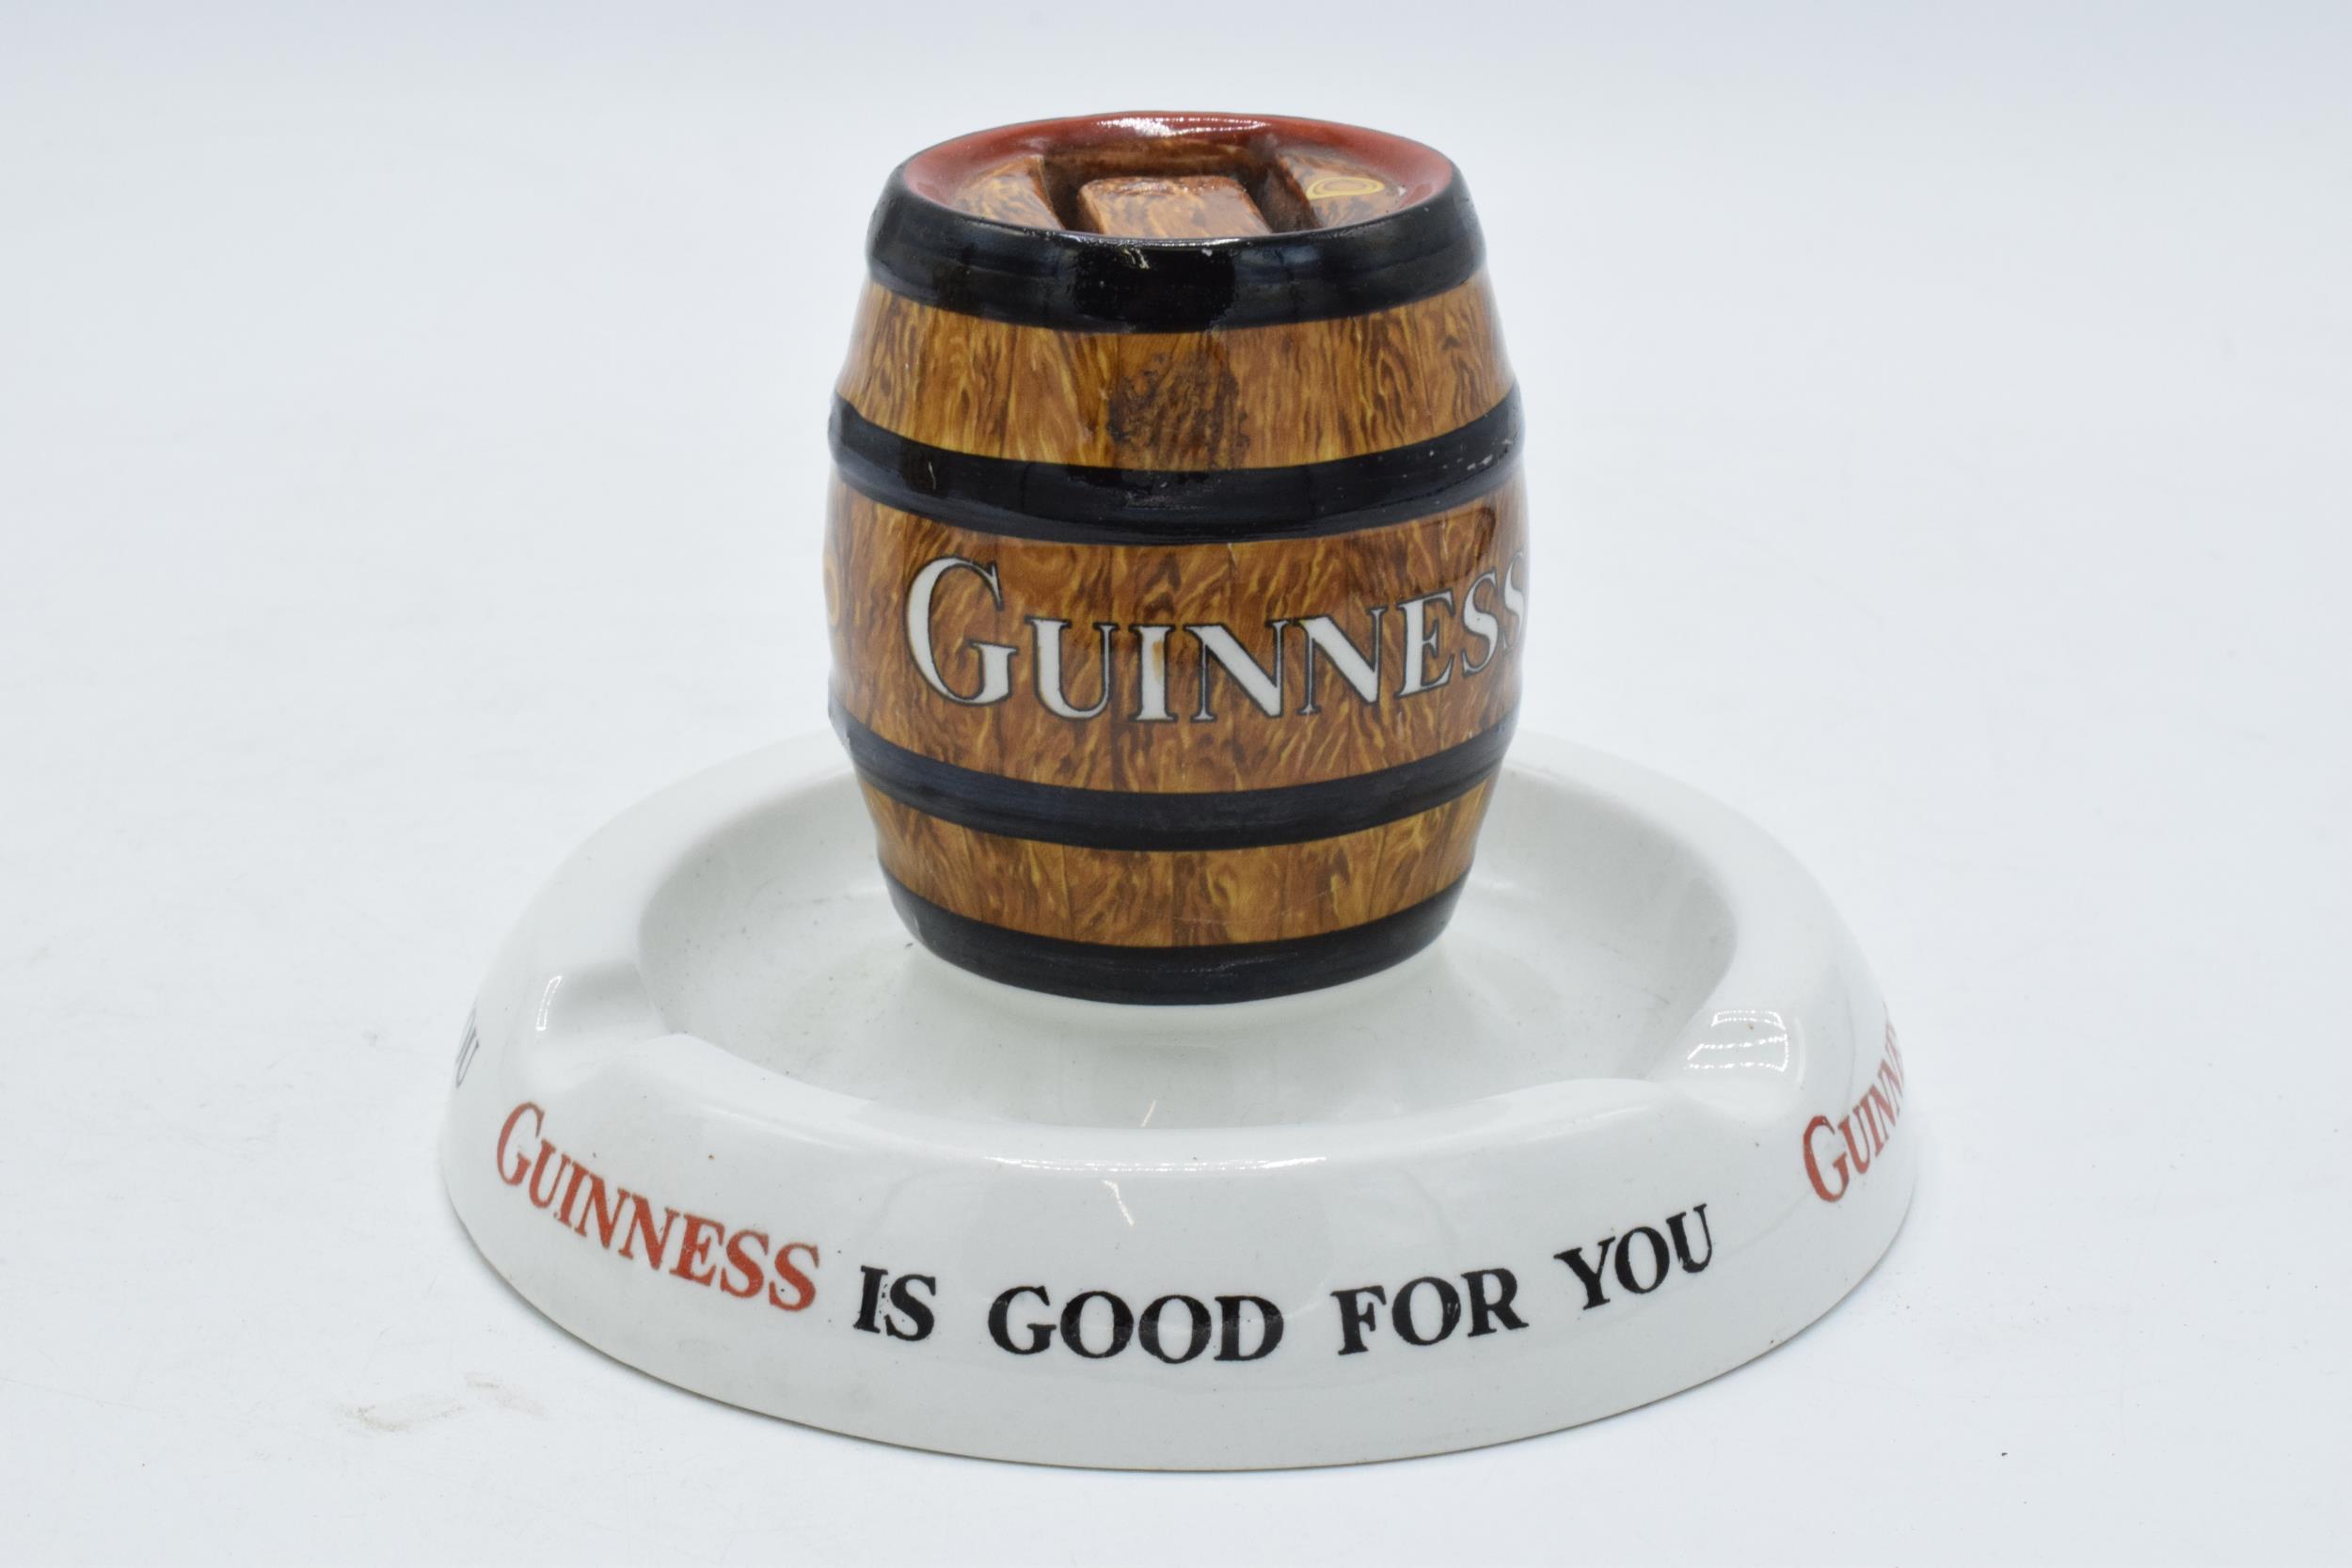 Mintons Guinness advertising ashtray and match striker. In good condition, loss of paint all over in - Image 3 of 3